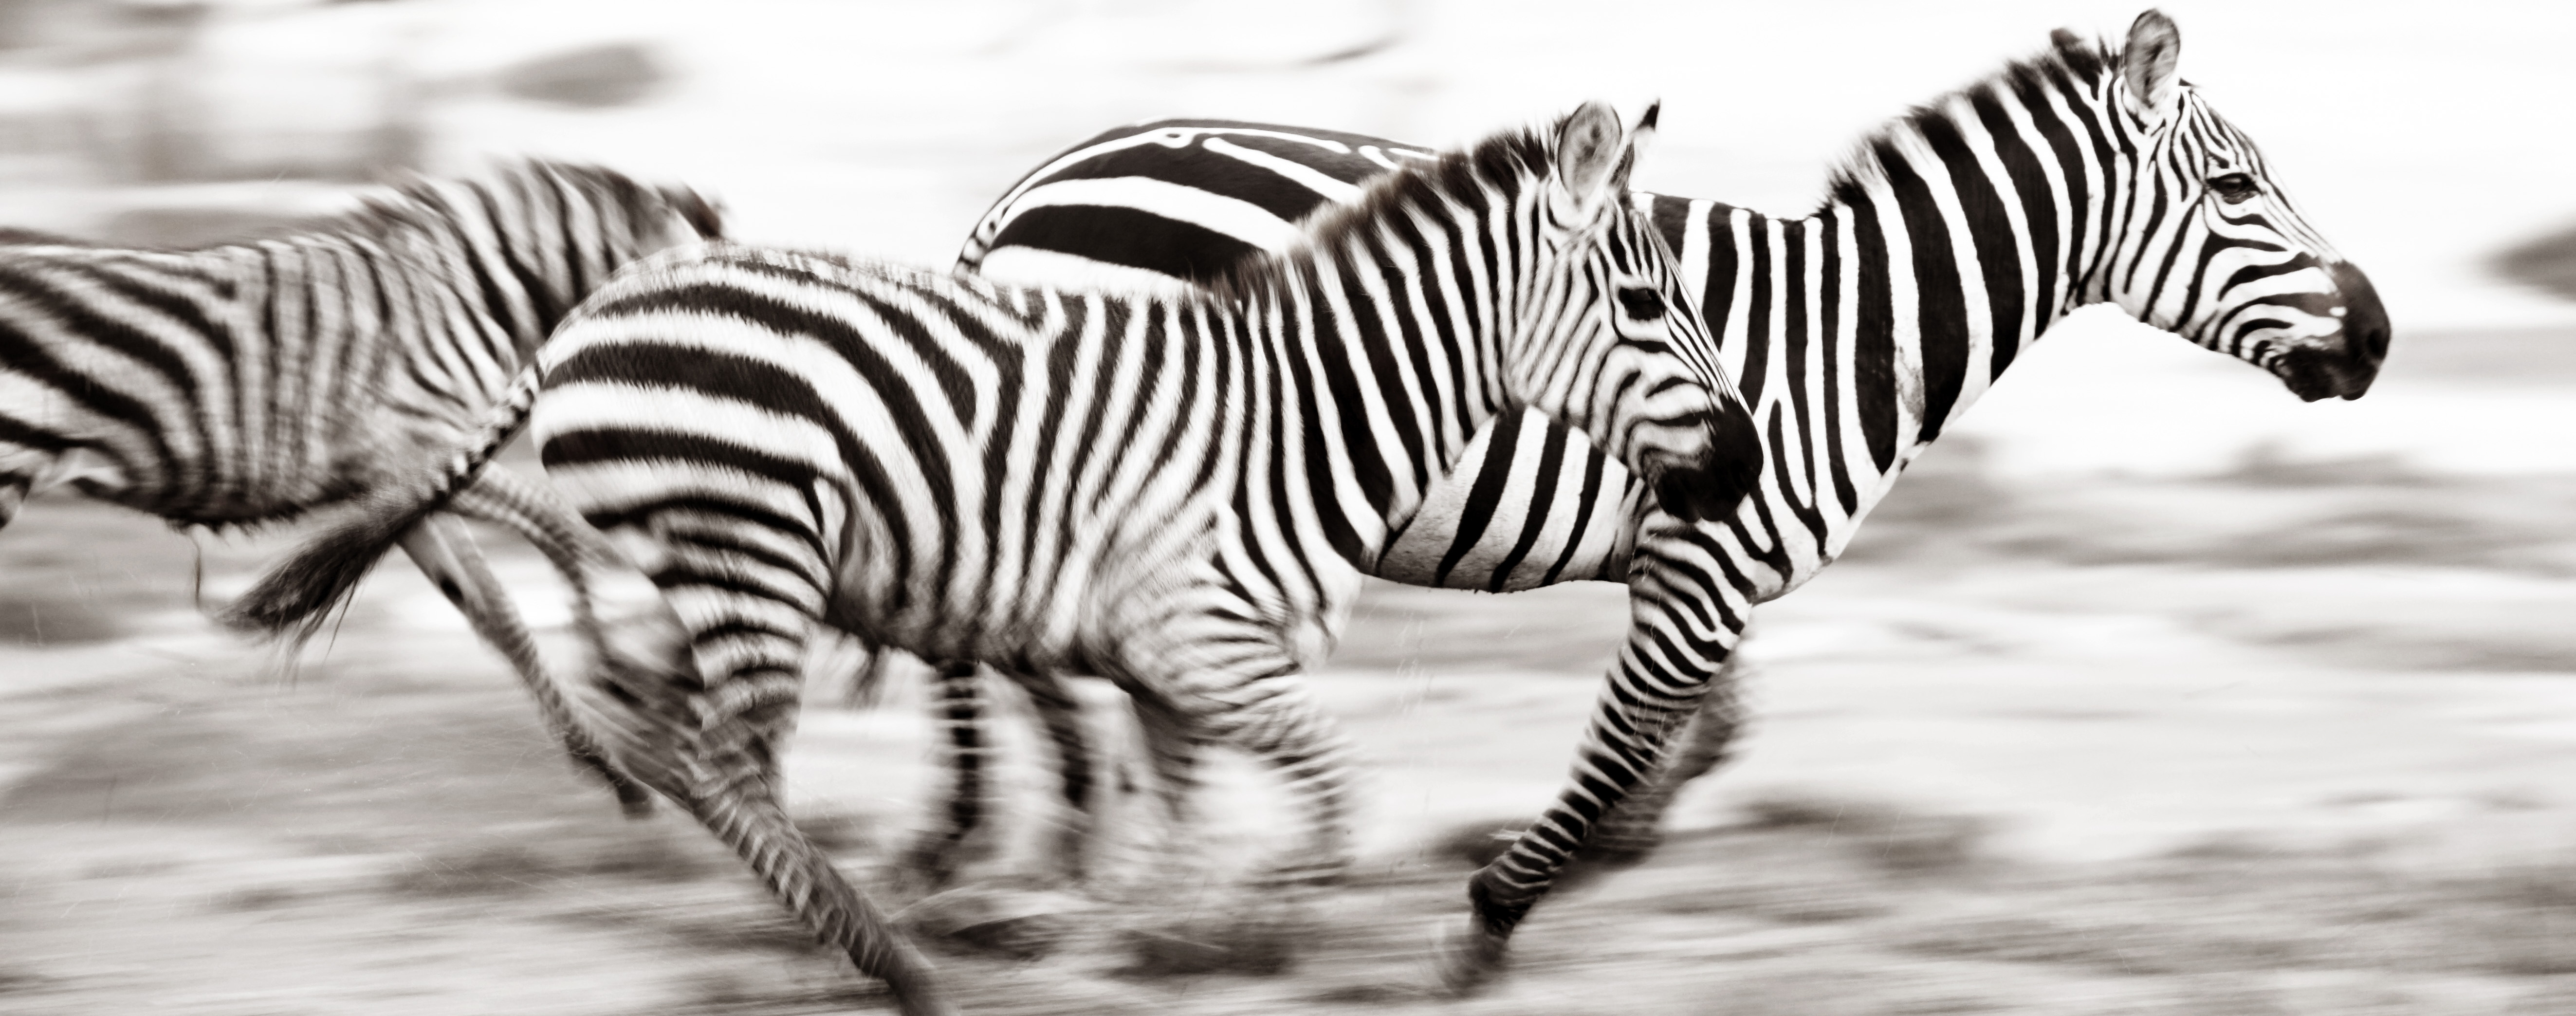 The collective noun for a herd of zebra is a dazzle